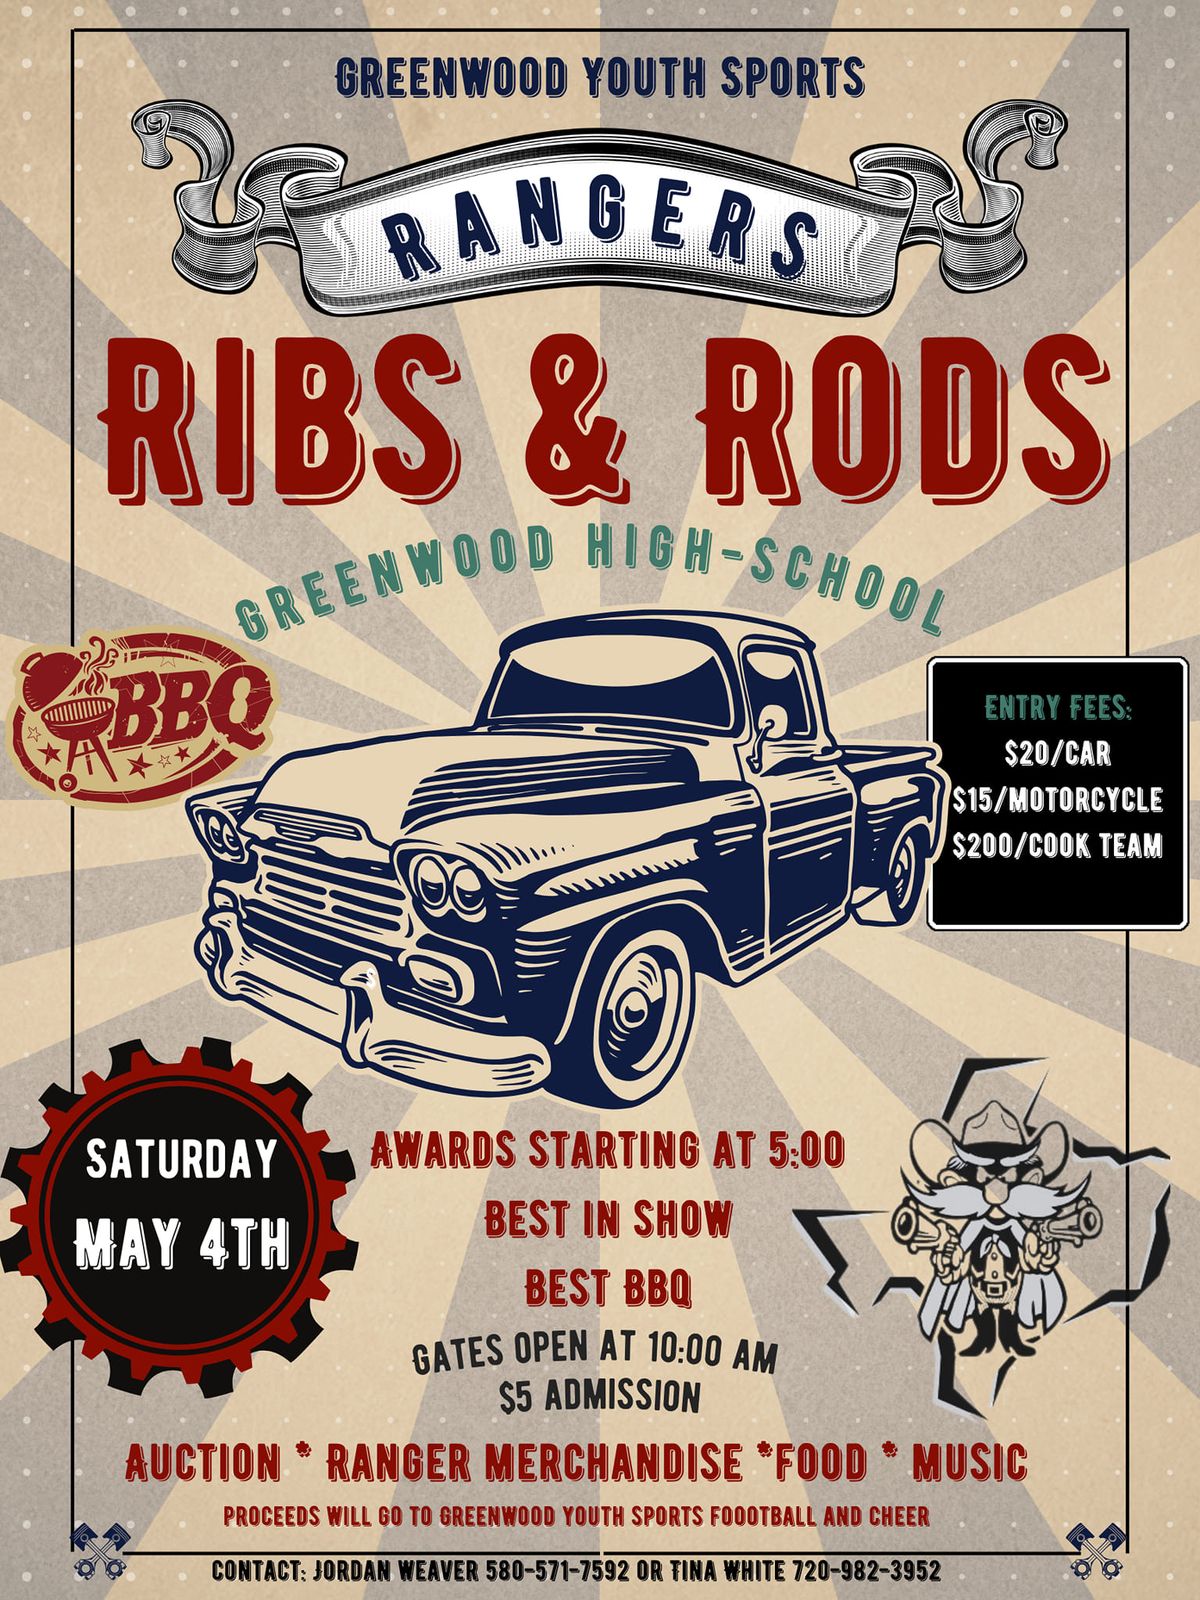 Rangers Youth Sports annual Ribs & Rods